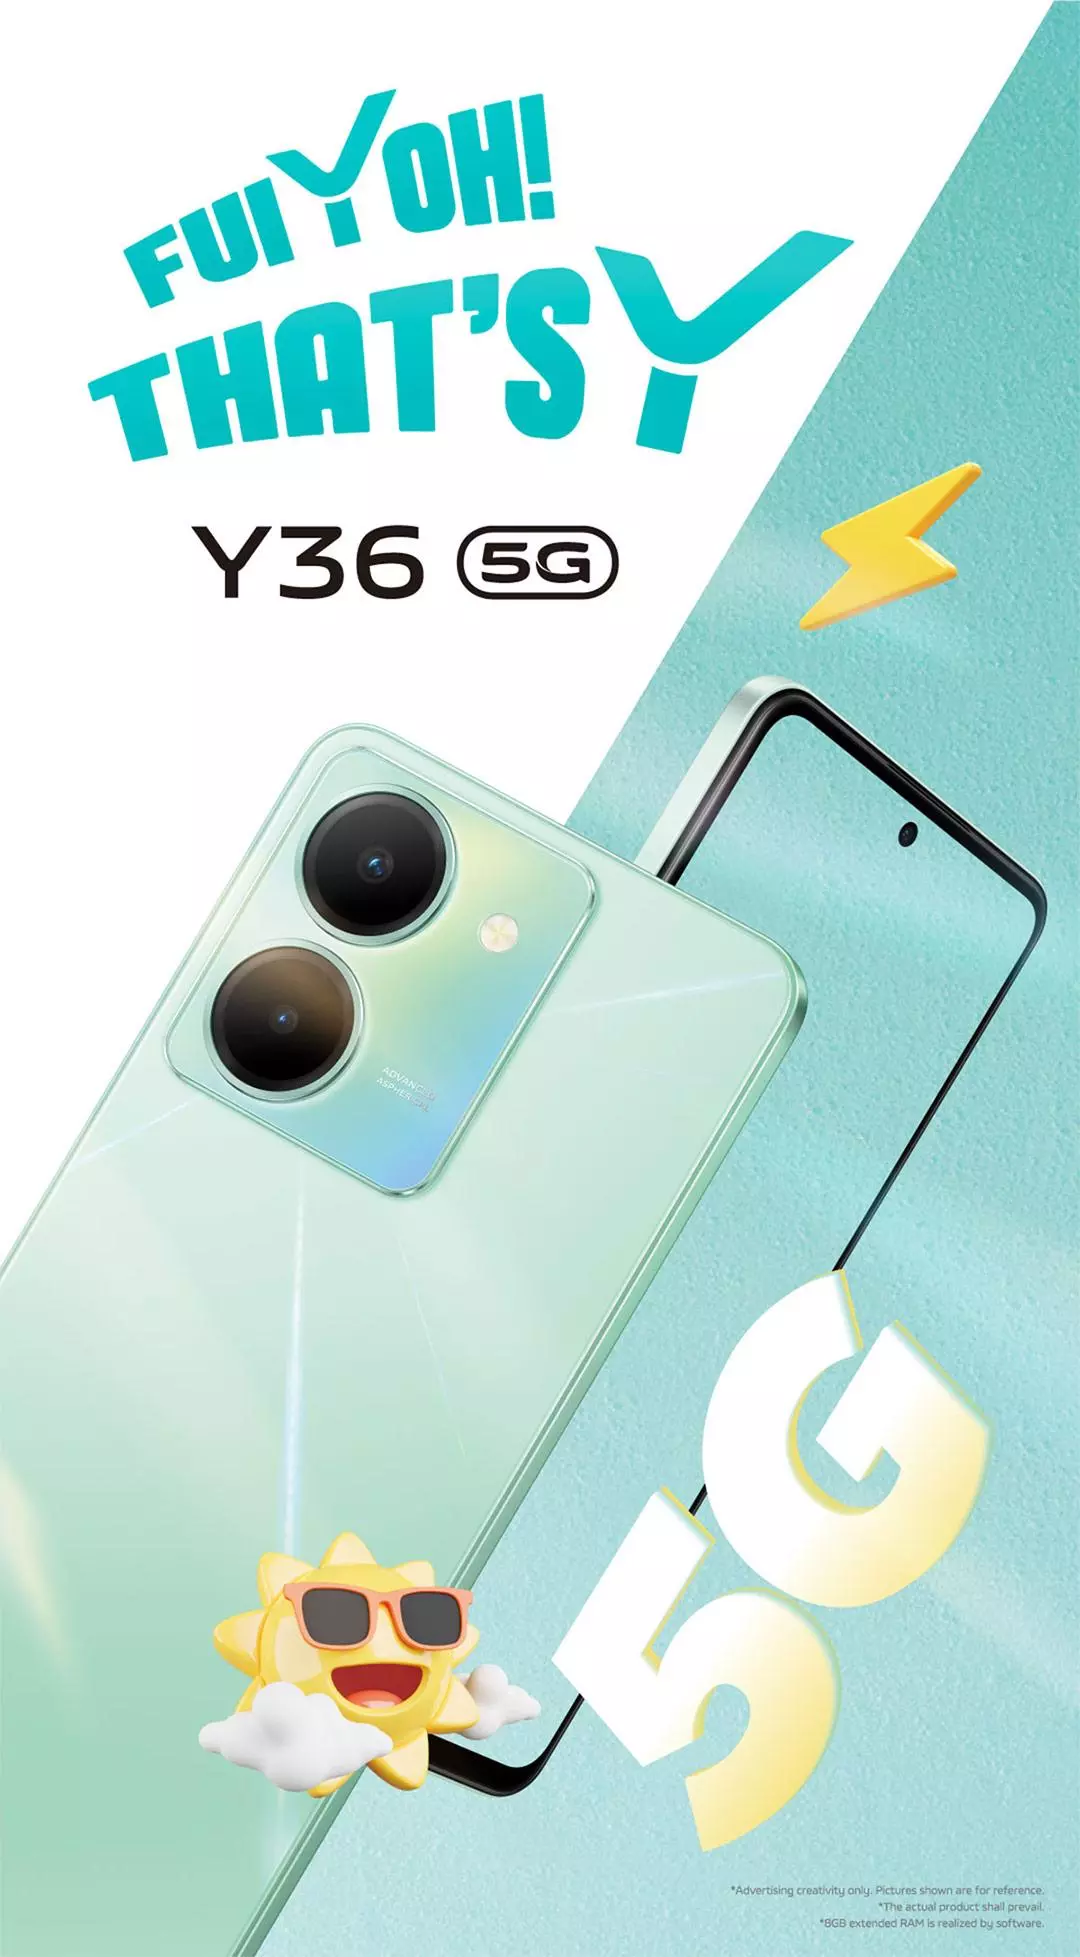 vivo Y36 5G pictures, official photos